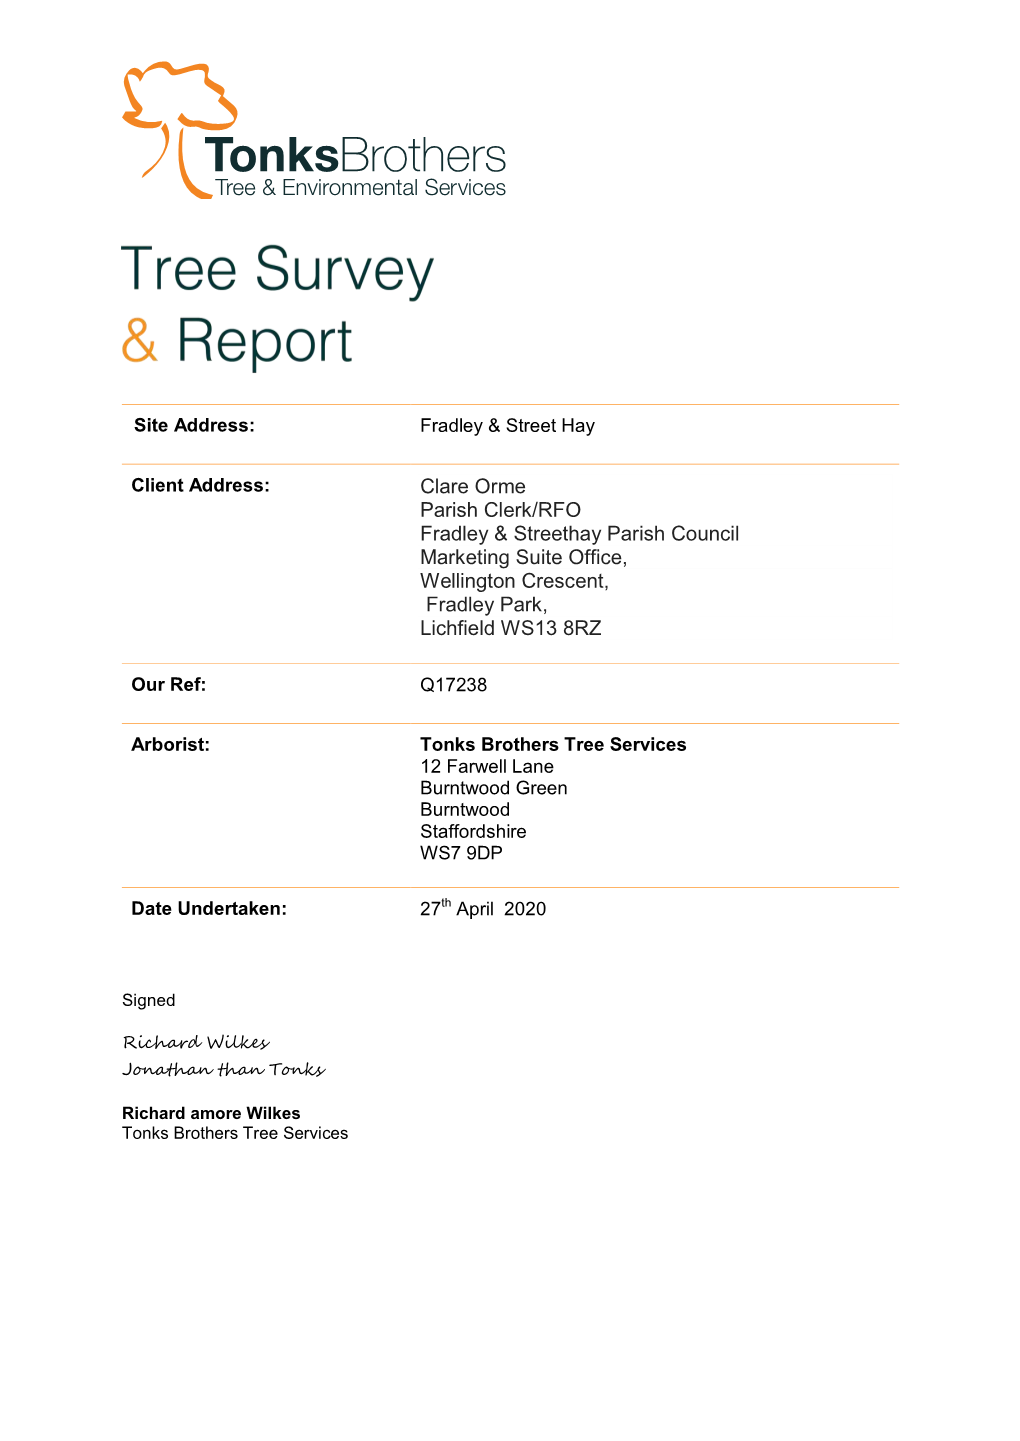 Tree Report and Schedule of All Trees on the Site Including Proposed Tree Works and Priority for Them to Be Undertaken